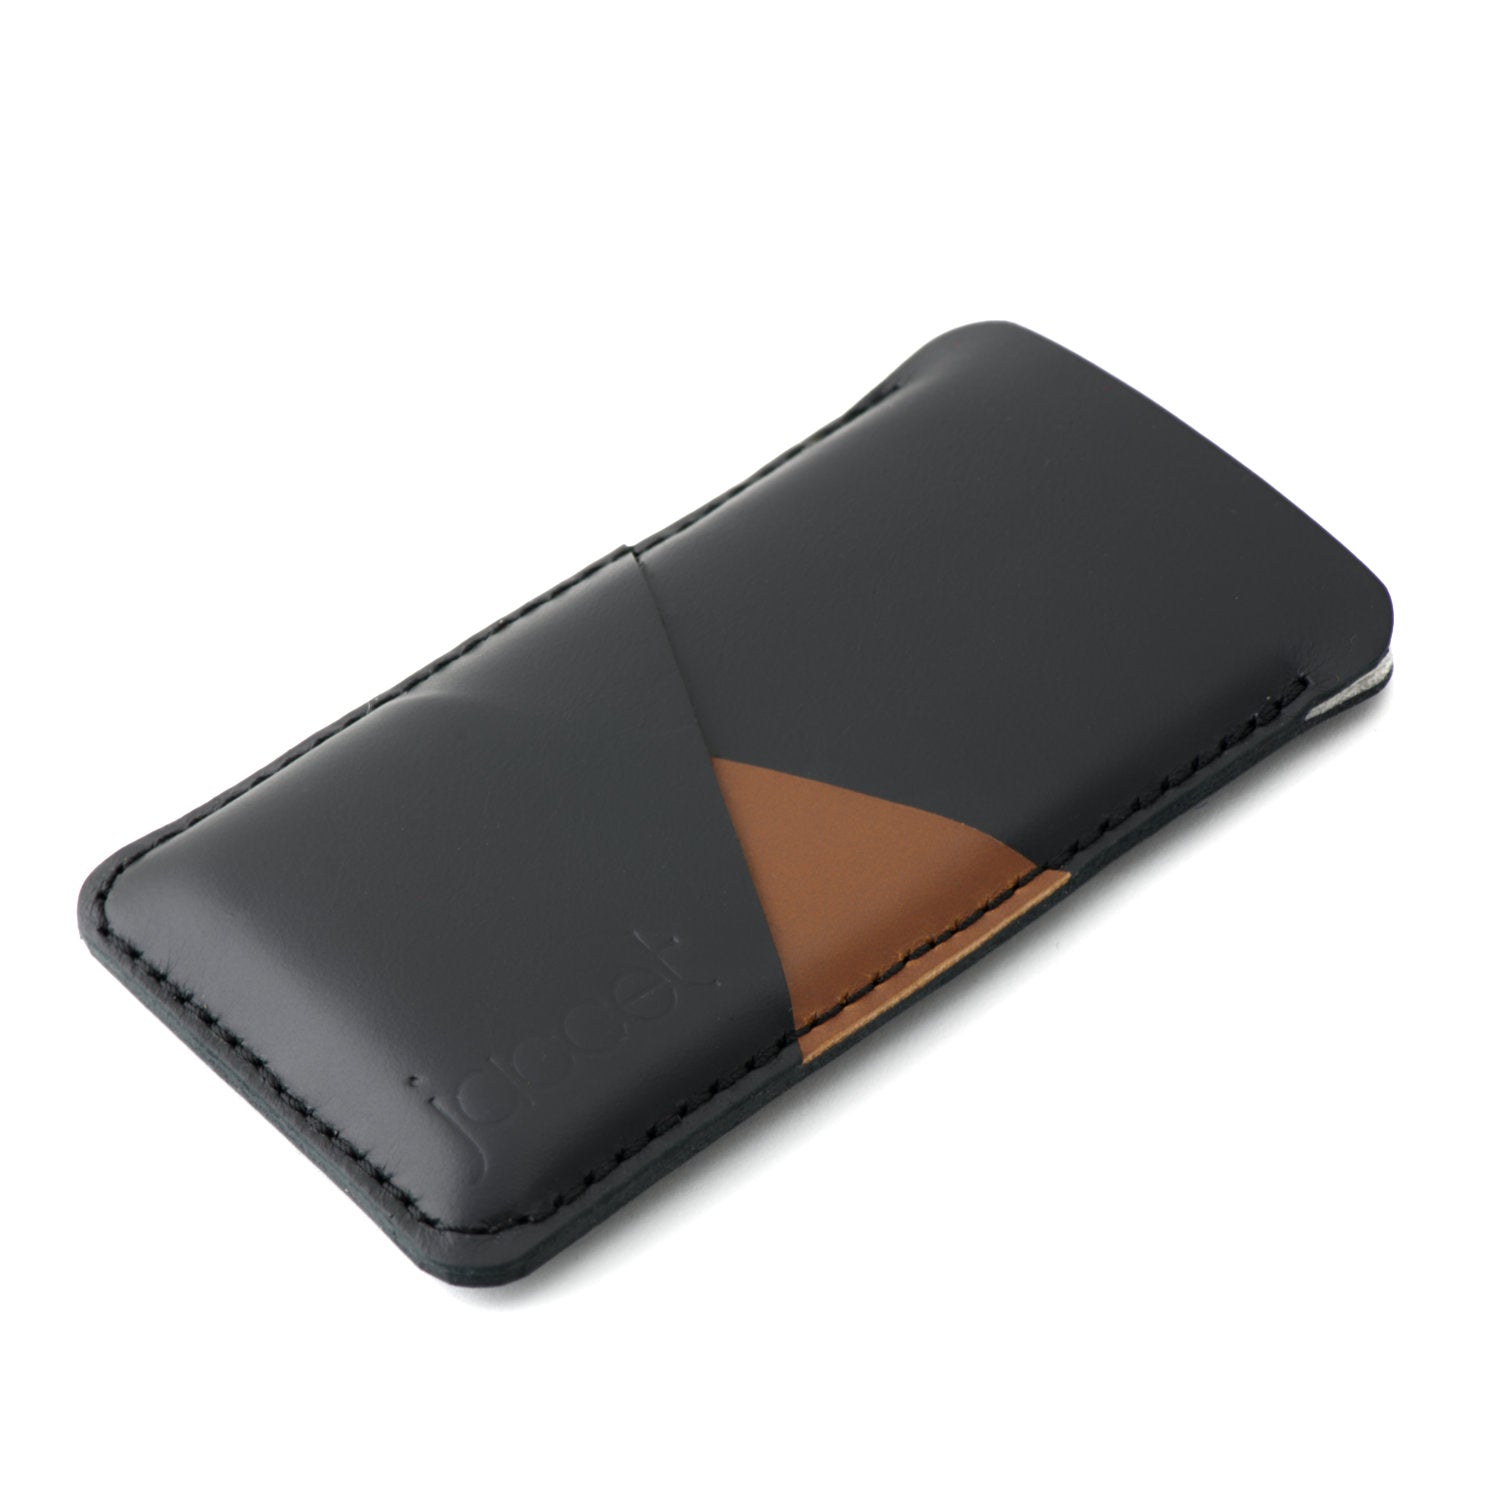 Full-grain leather Xiaomi sleeve - Black leather with two pockets voor cards